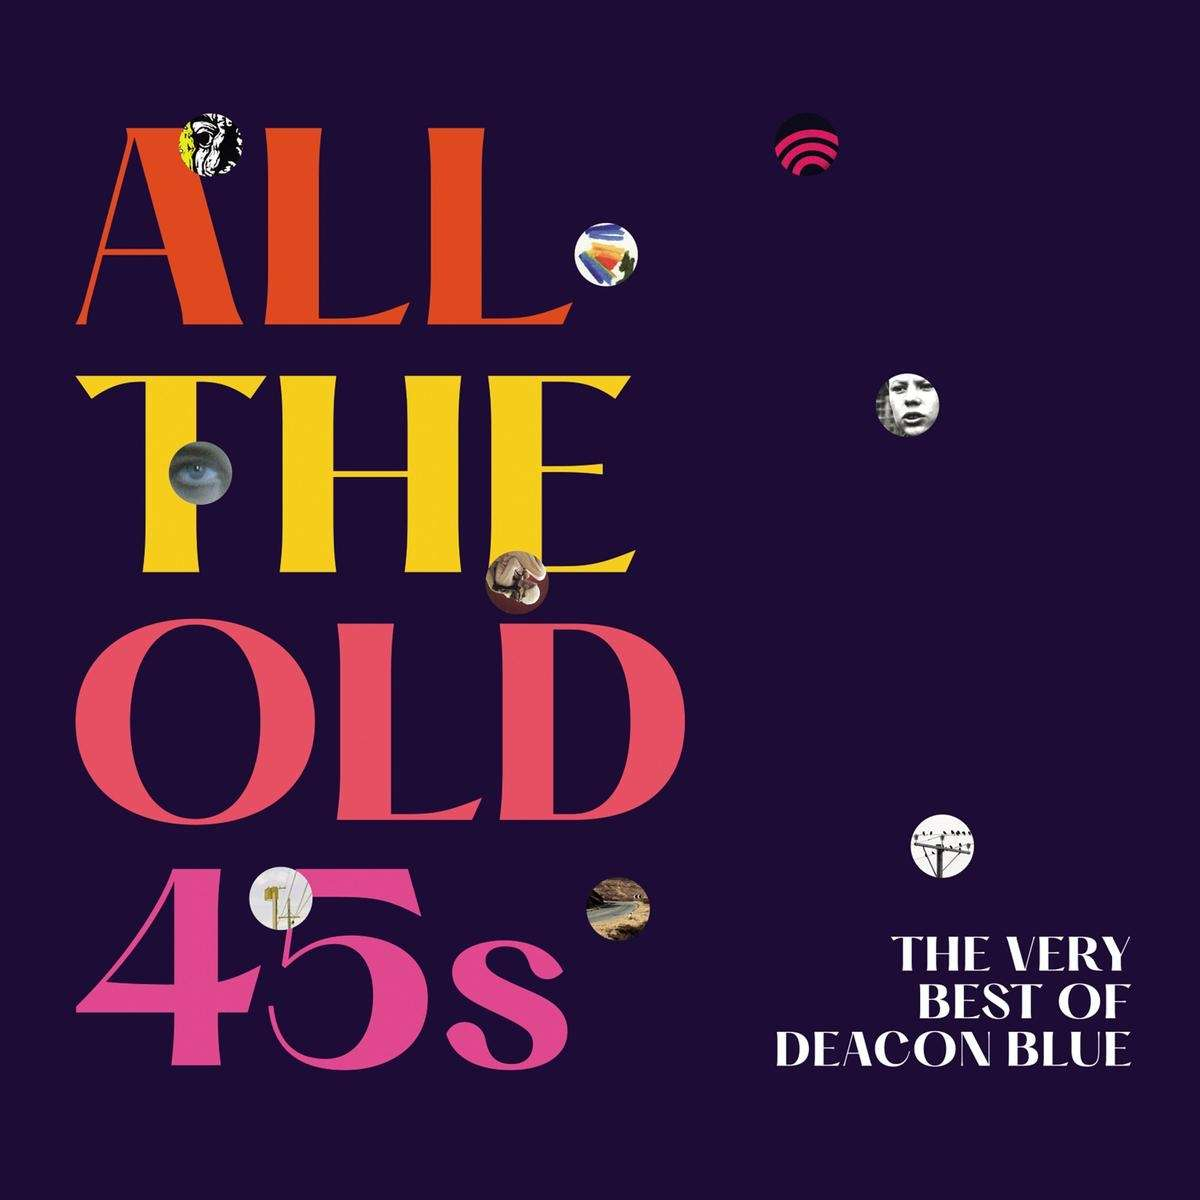 ALL THE OLD 45S: THE VERY BEST OF DEACON BLUE [2 CD SOFT PACK]